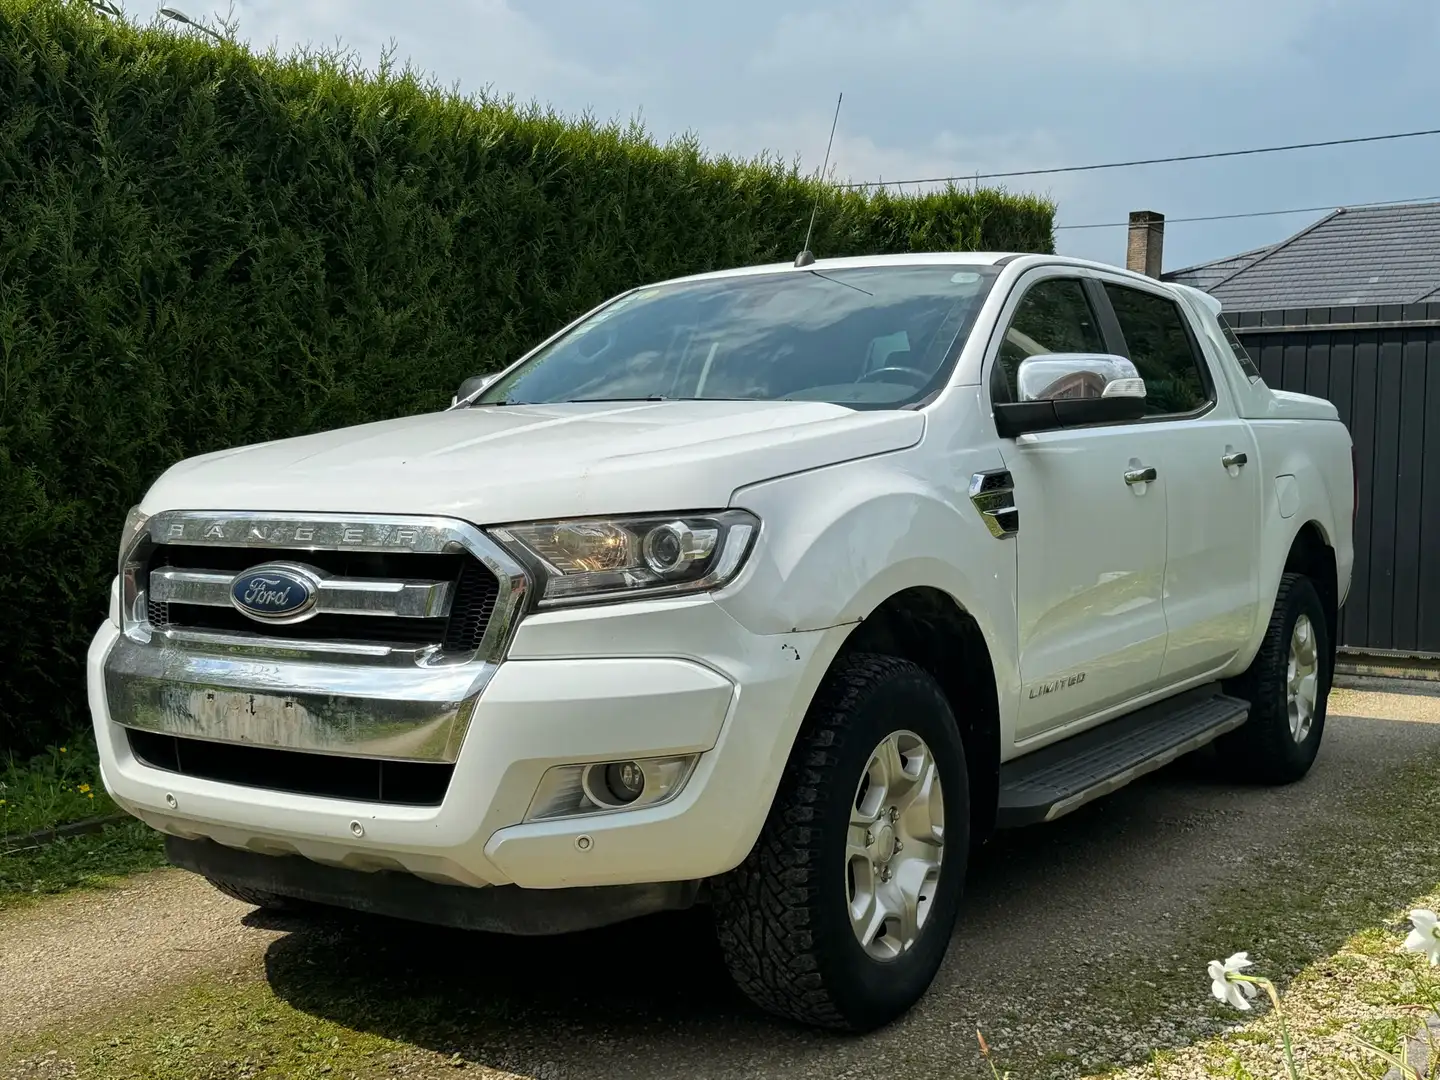 Ford Ranger Autm. Limited 3.2TDCI+++Euro 6c+++17500 Netto+++ Blanc - 1